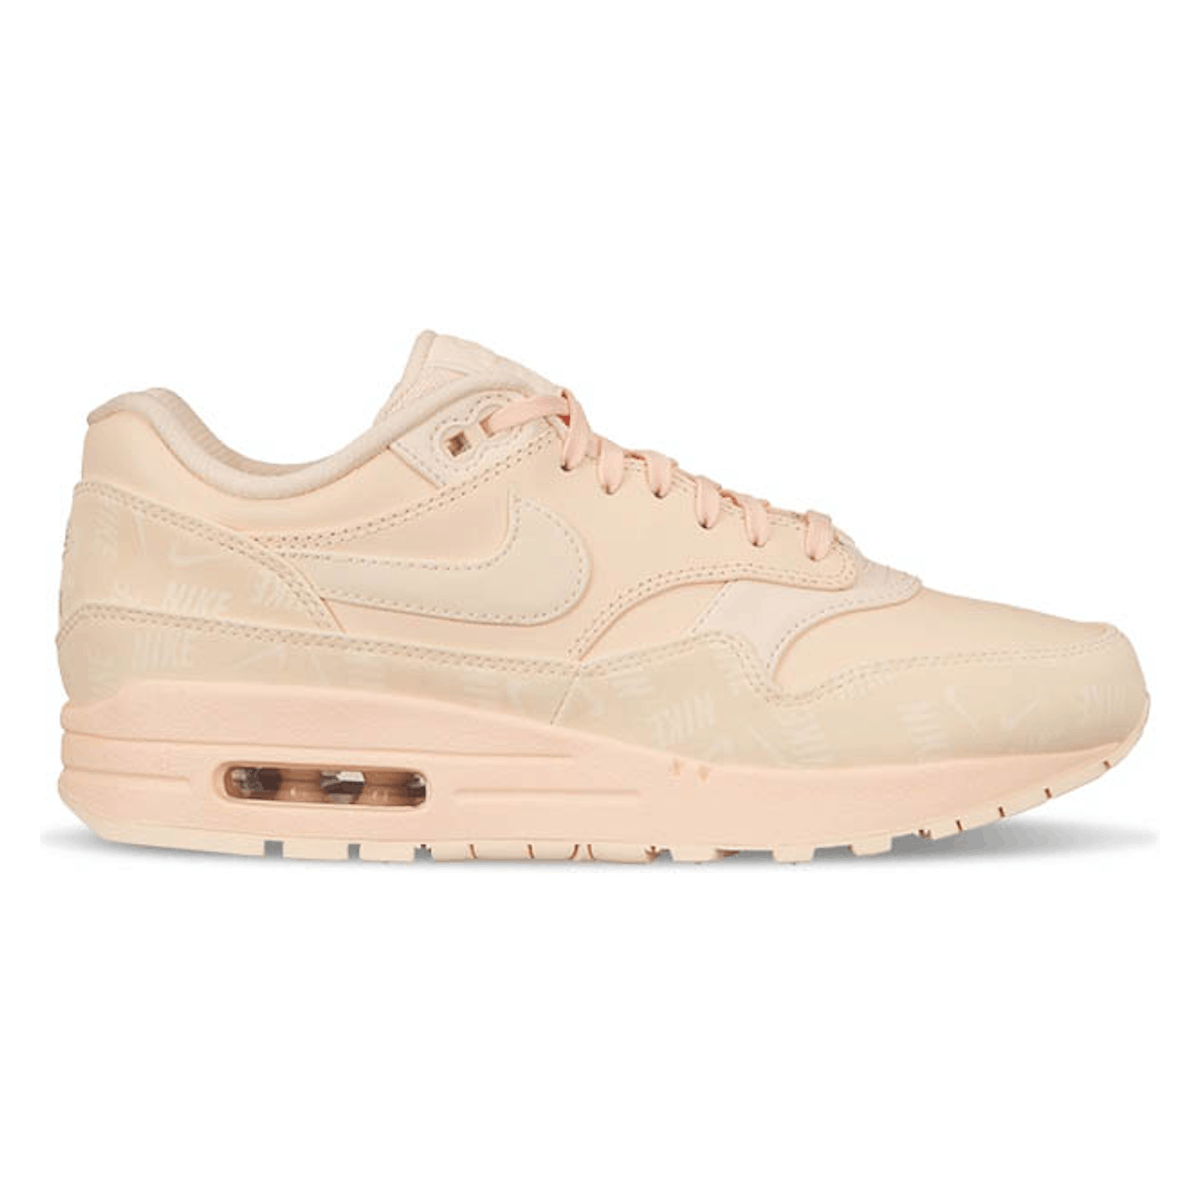 Nike WMNS Air Max 1 Lux "Guava Ice"